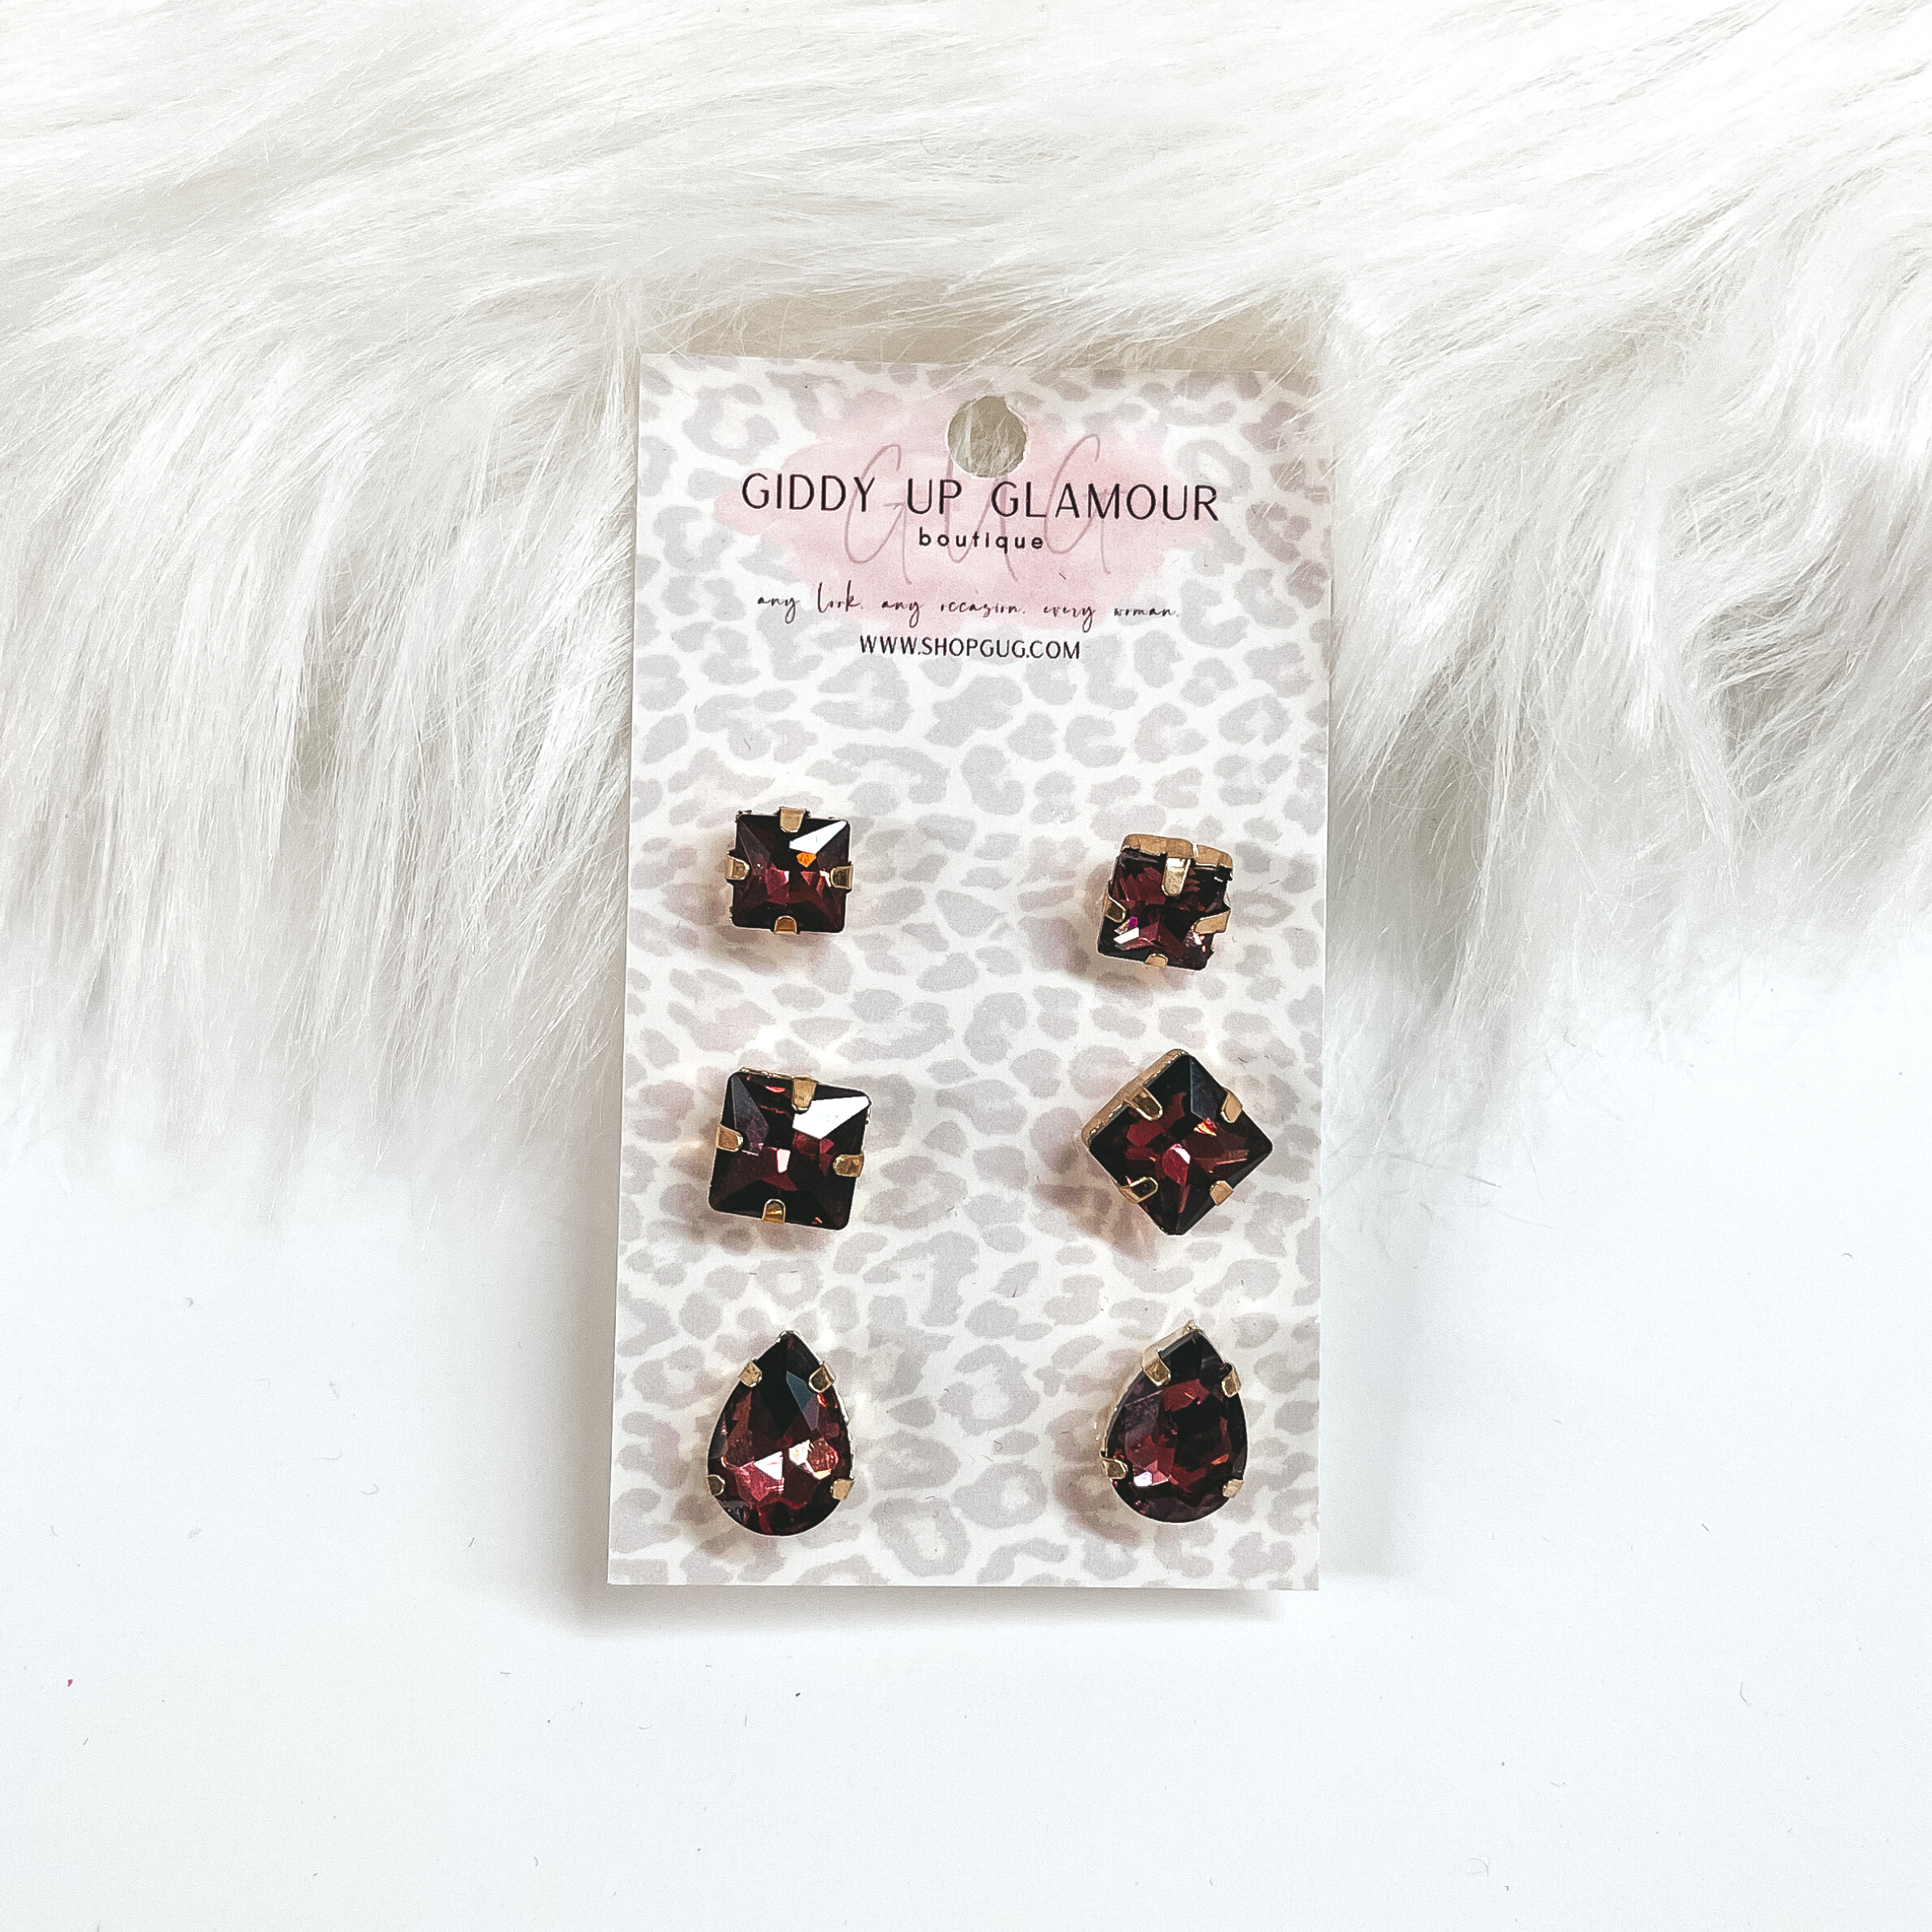 Buy 3 for $10 | Set of Three | Faux Crystal Stud Earrings in Gold Tone Setting - Giddy Up Glamour Boutique